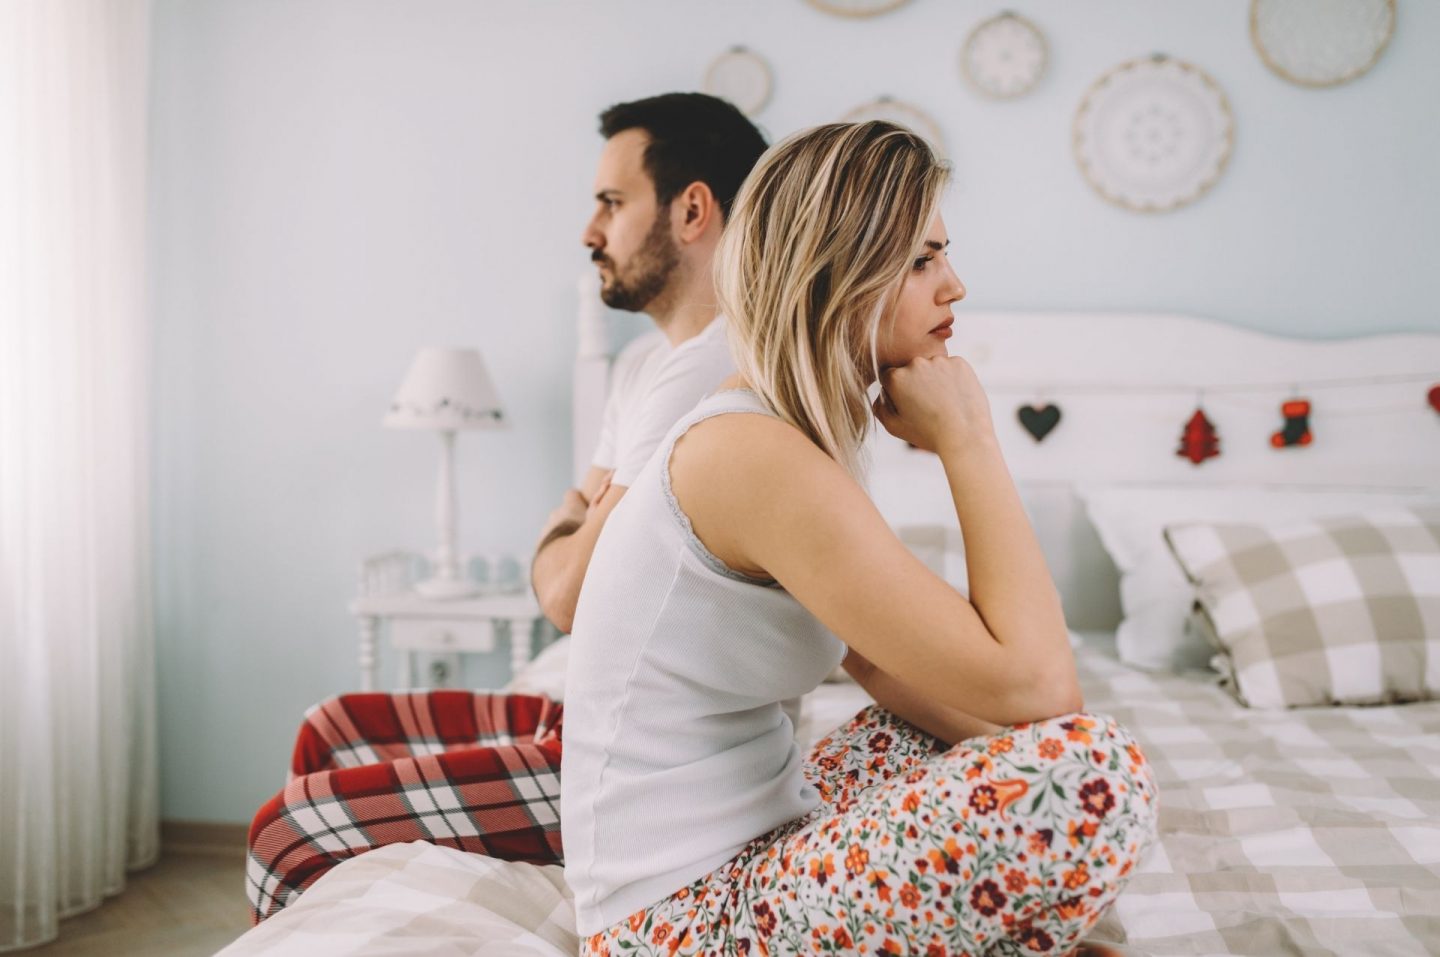 A man and woman sat on their bed facing opposite directions. They both look fed up as though they've had an argument or their personal boundaries have been disrespected.